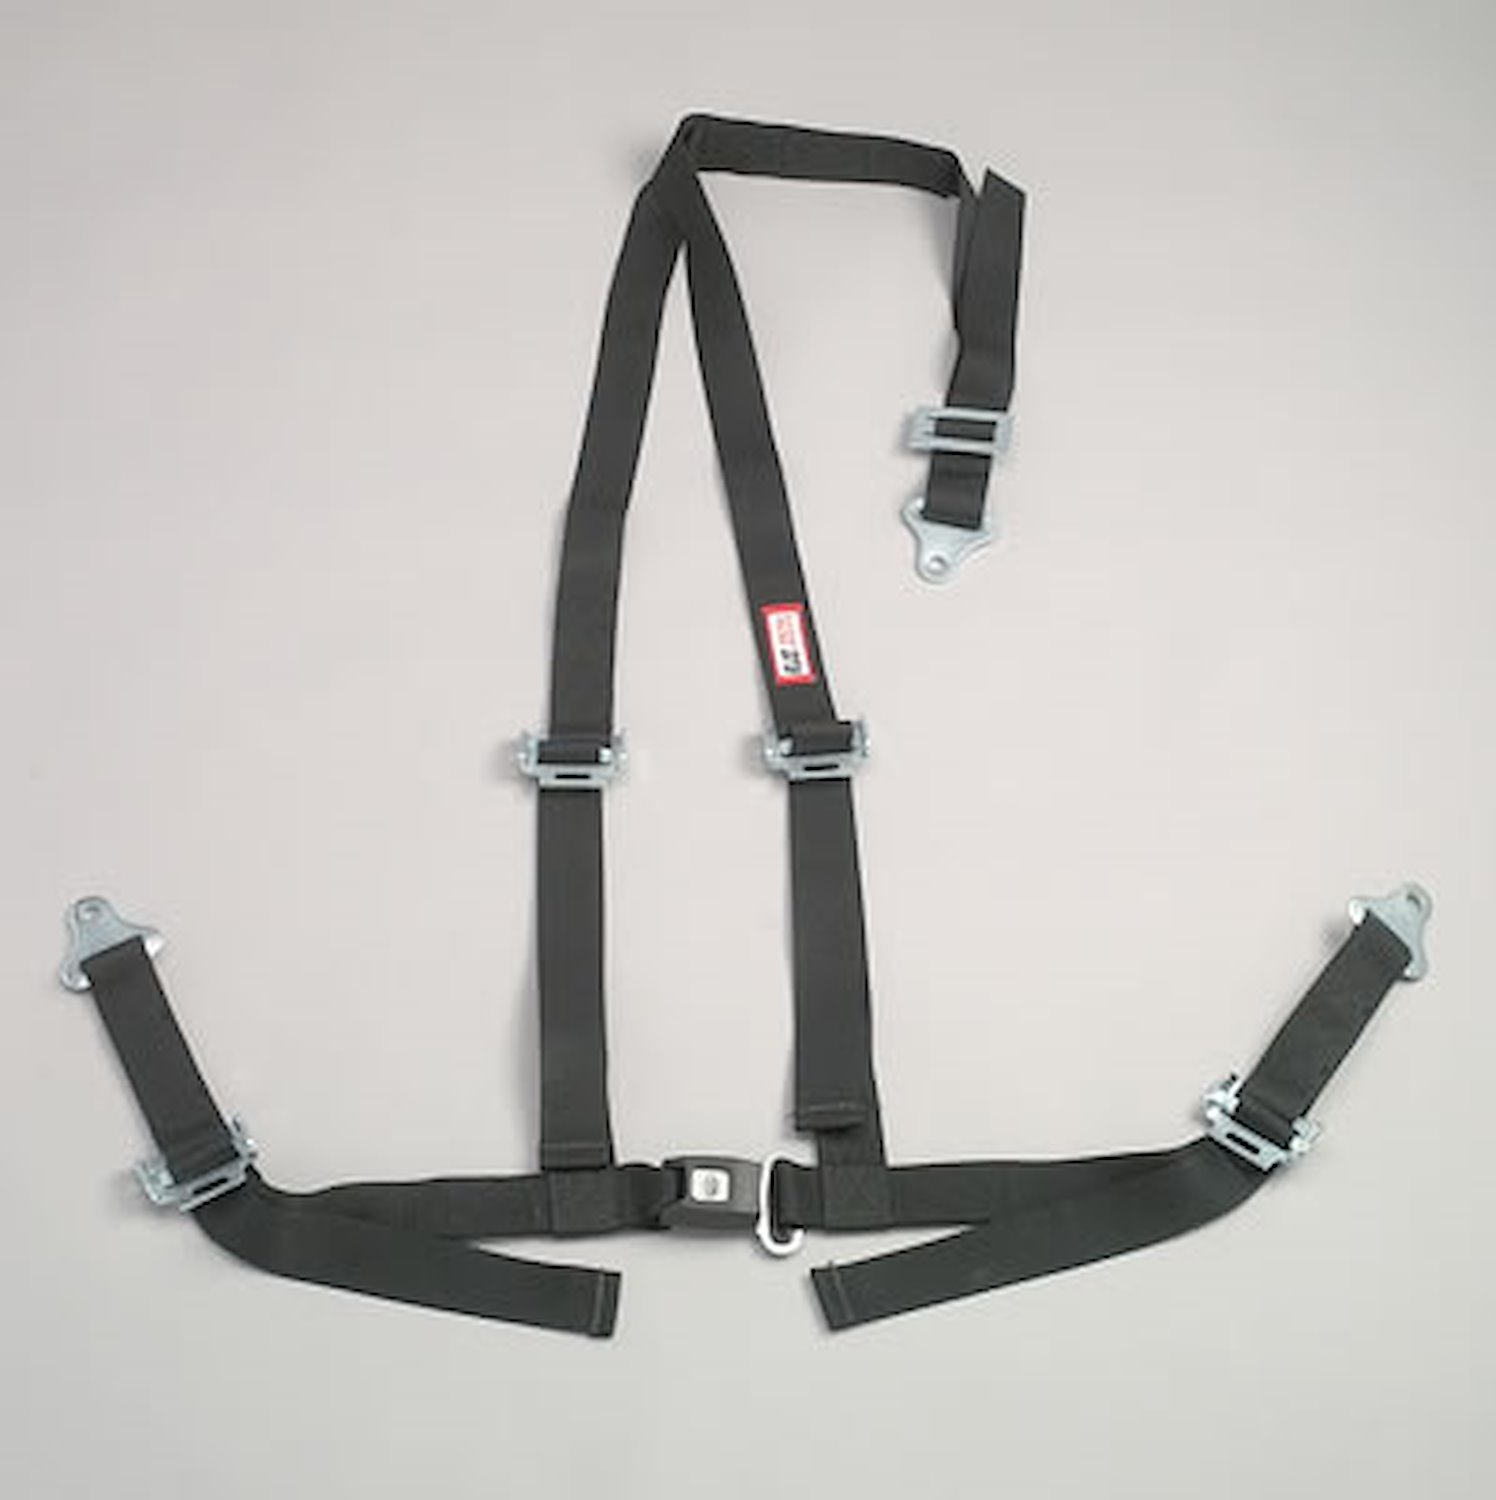 NON-SFI B&T HARNESS 2 PULL UP Lap Belt 2 S. H. Individual ROLL BAR Mount ALL WRAP ENDS KHAKI